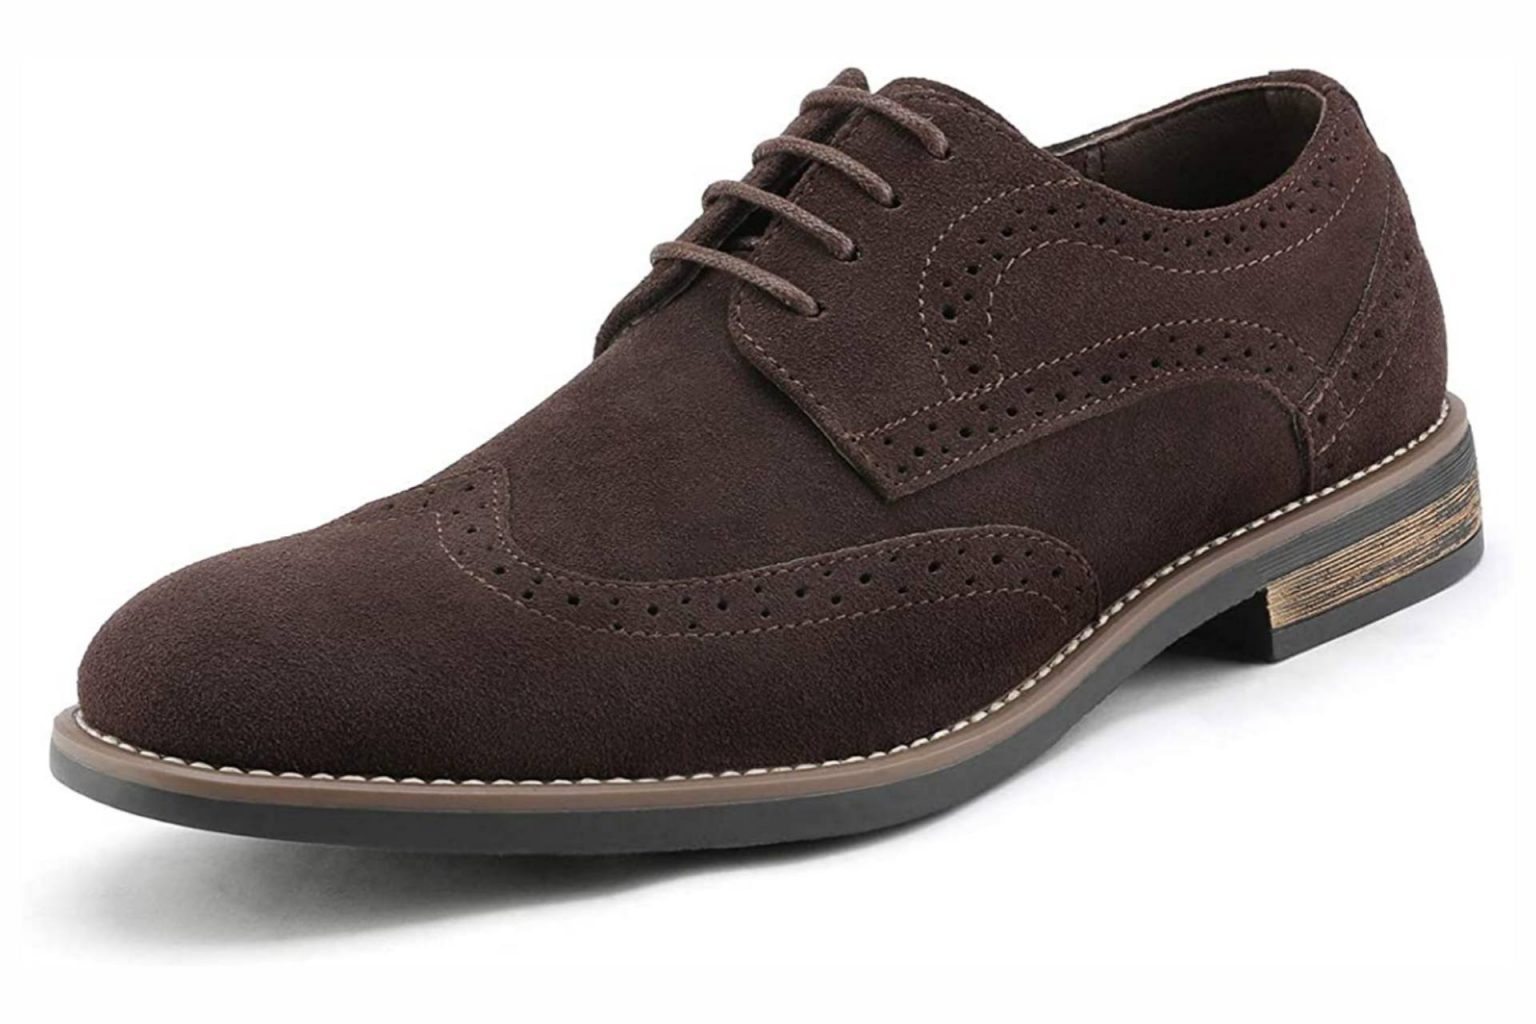 Best 20 Men's High-quality Dress Shoes Under $50 in 2022